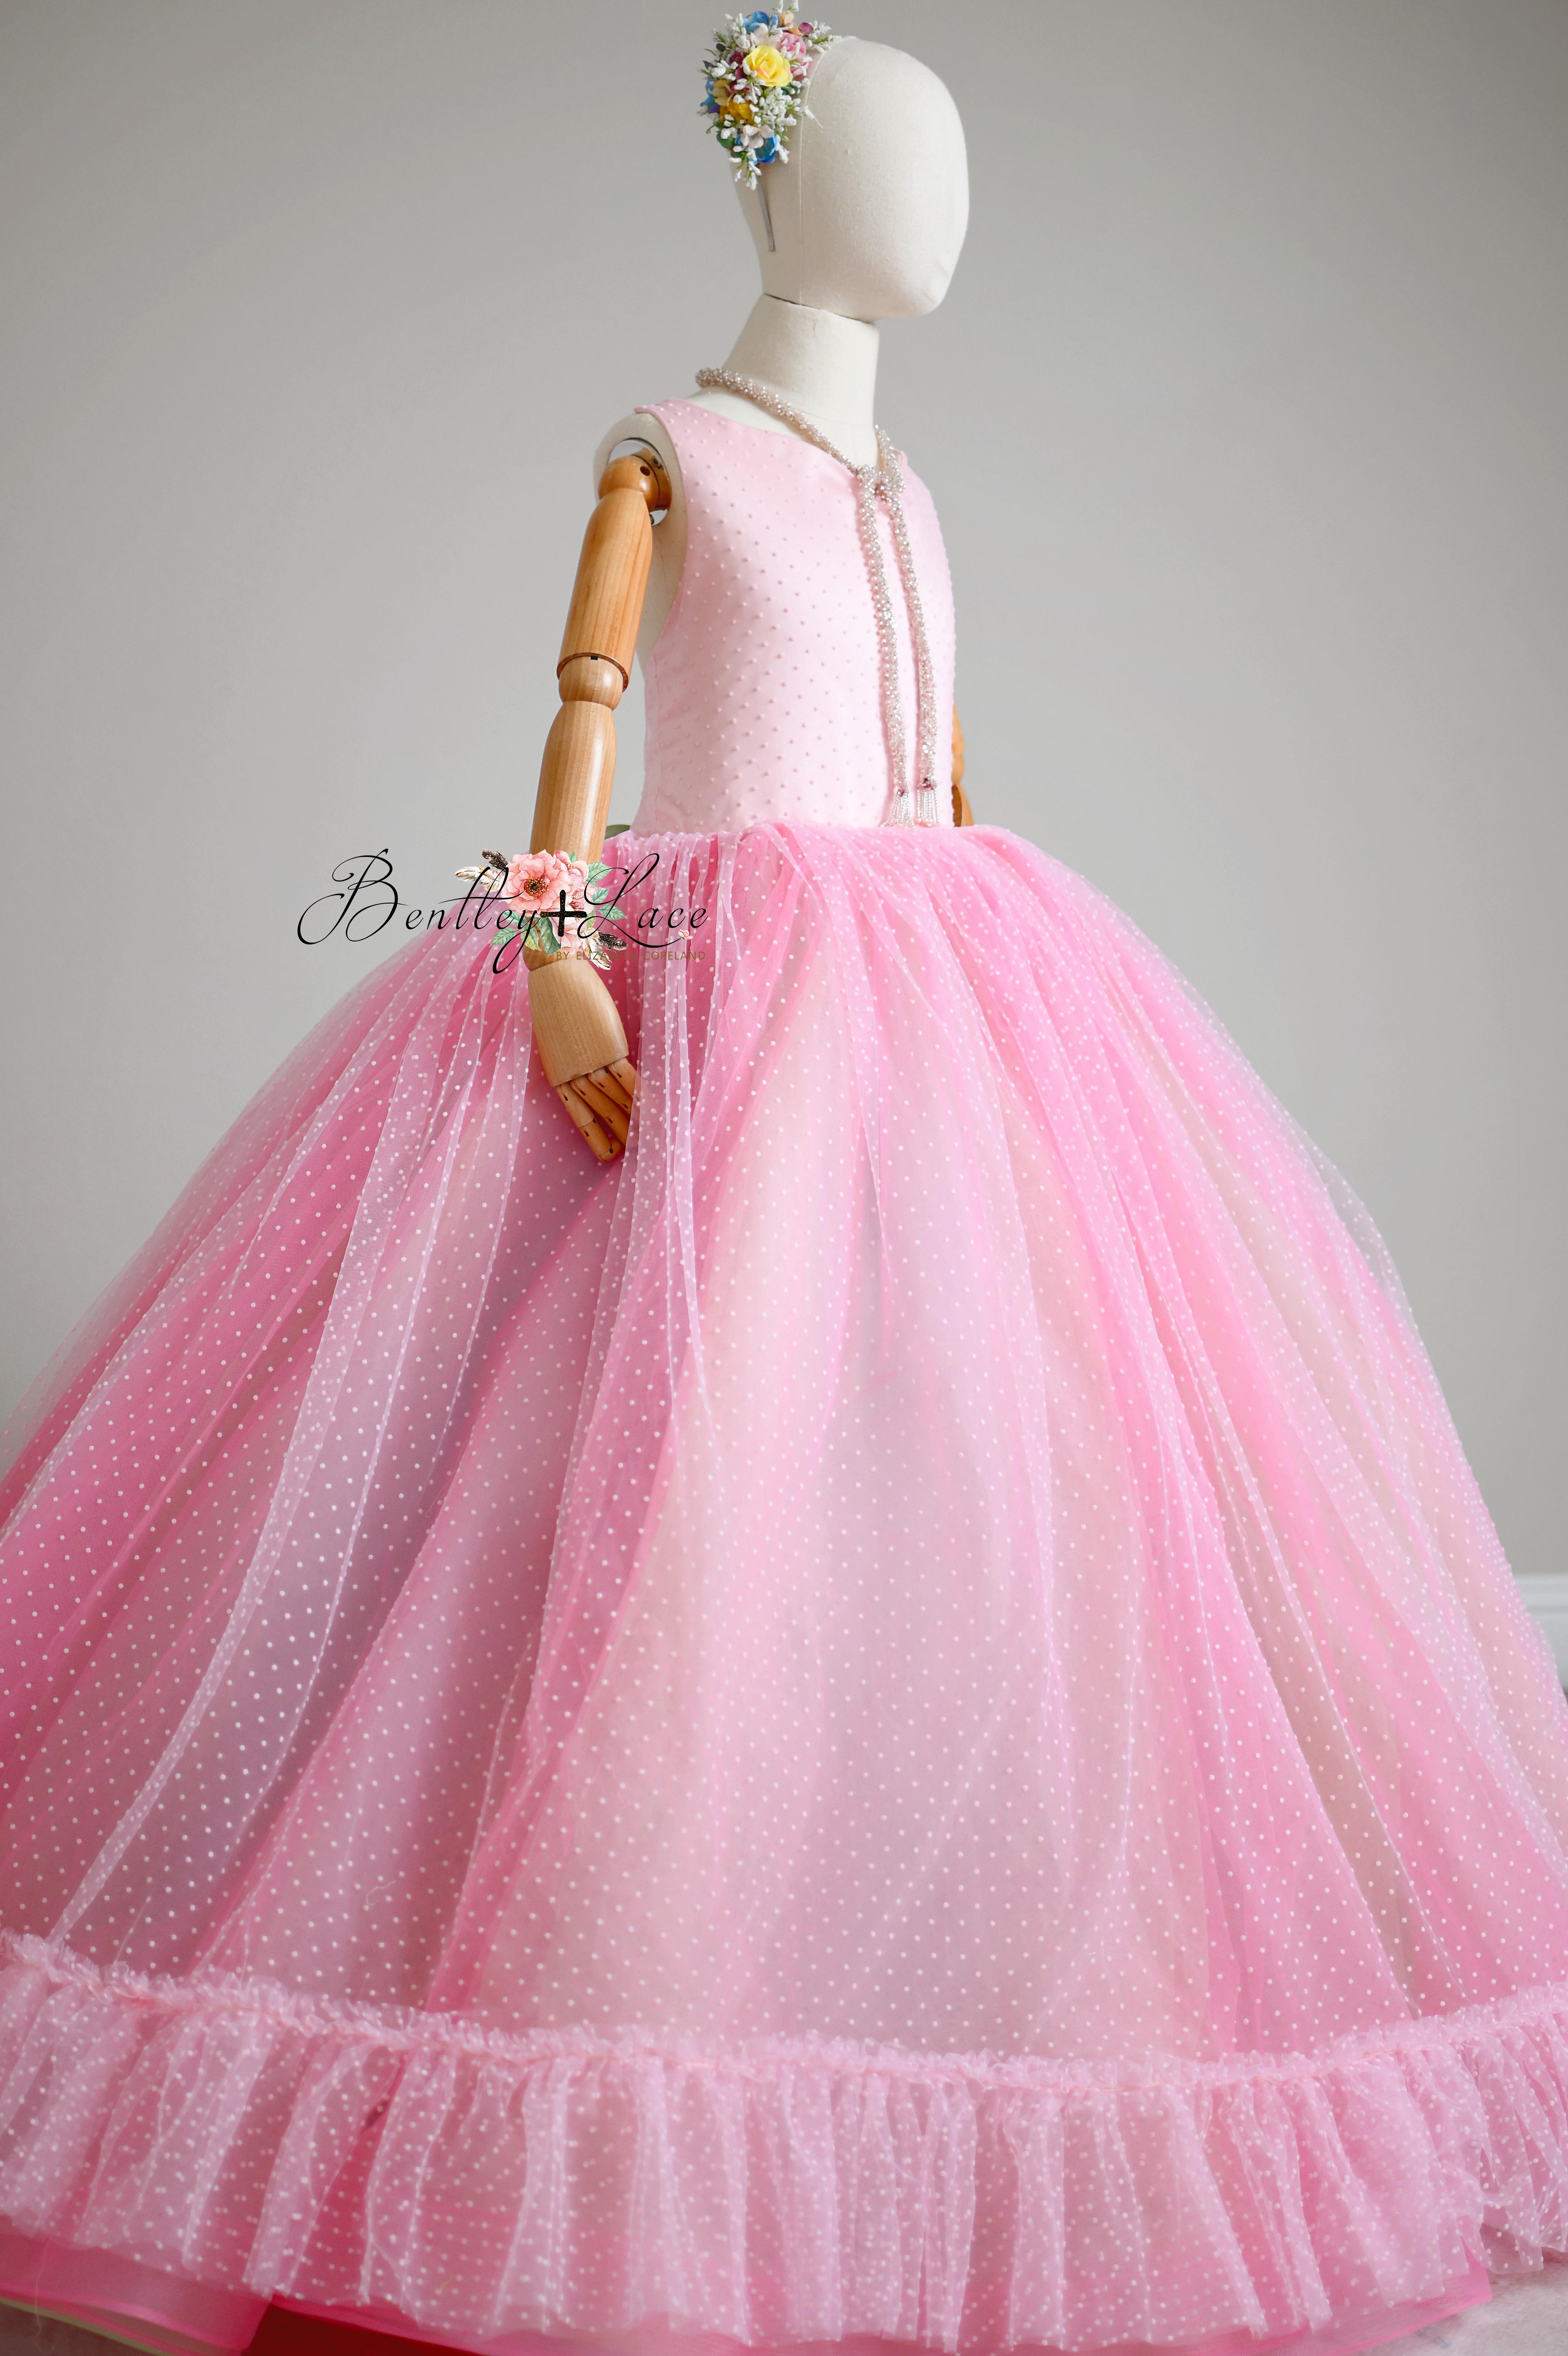 Custom flower girl gowns and special occasion gowns.